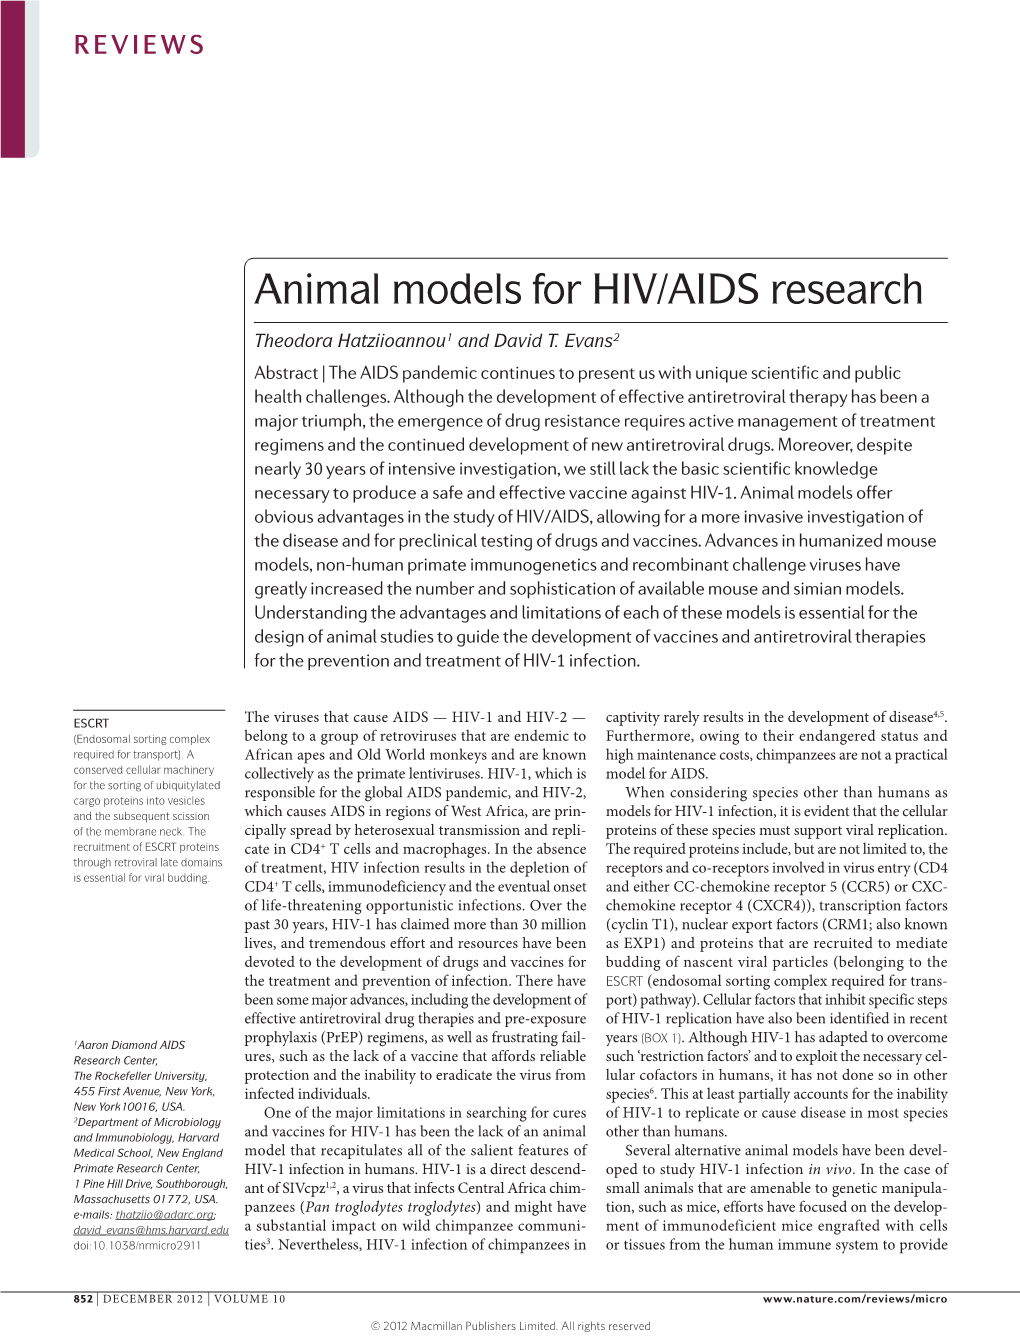 Animal Models for HIV/AIDS Research